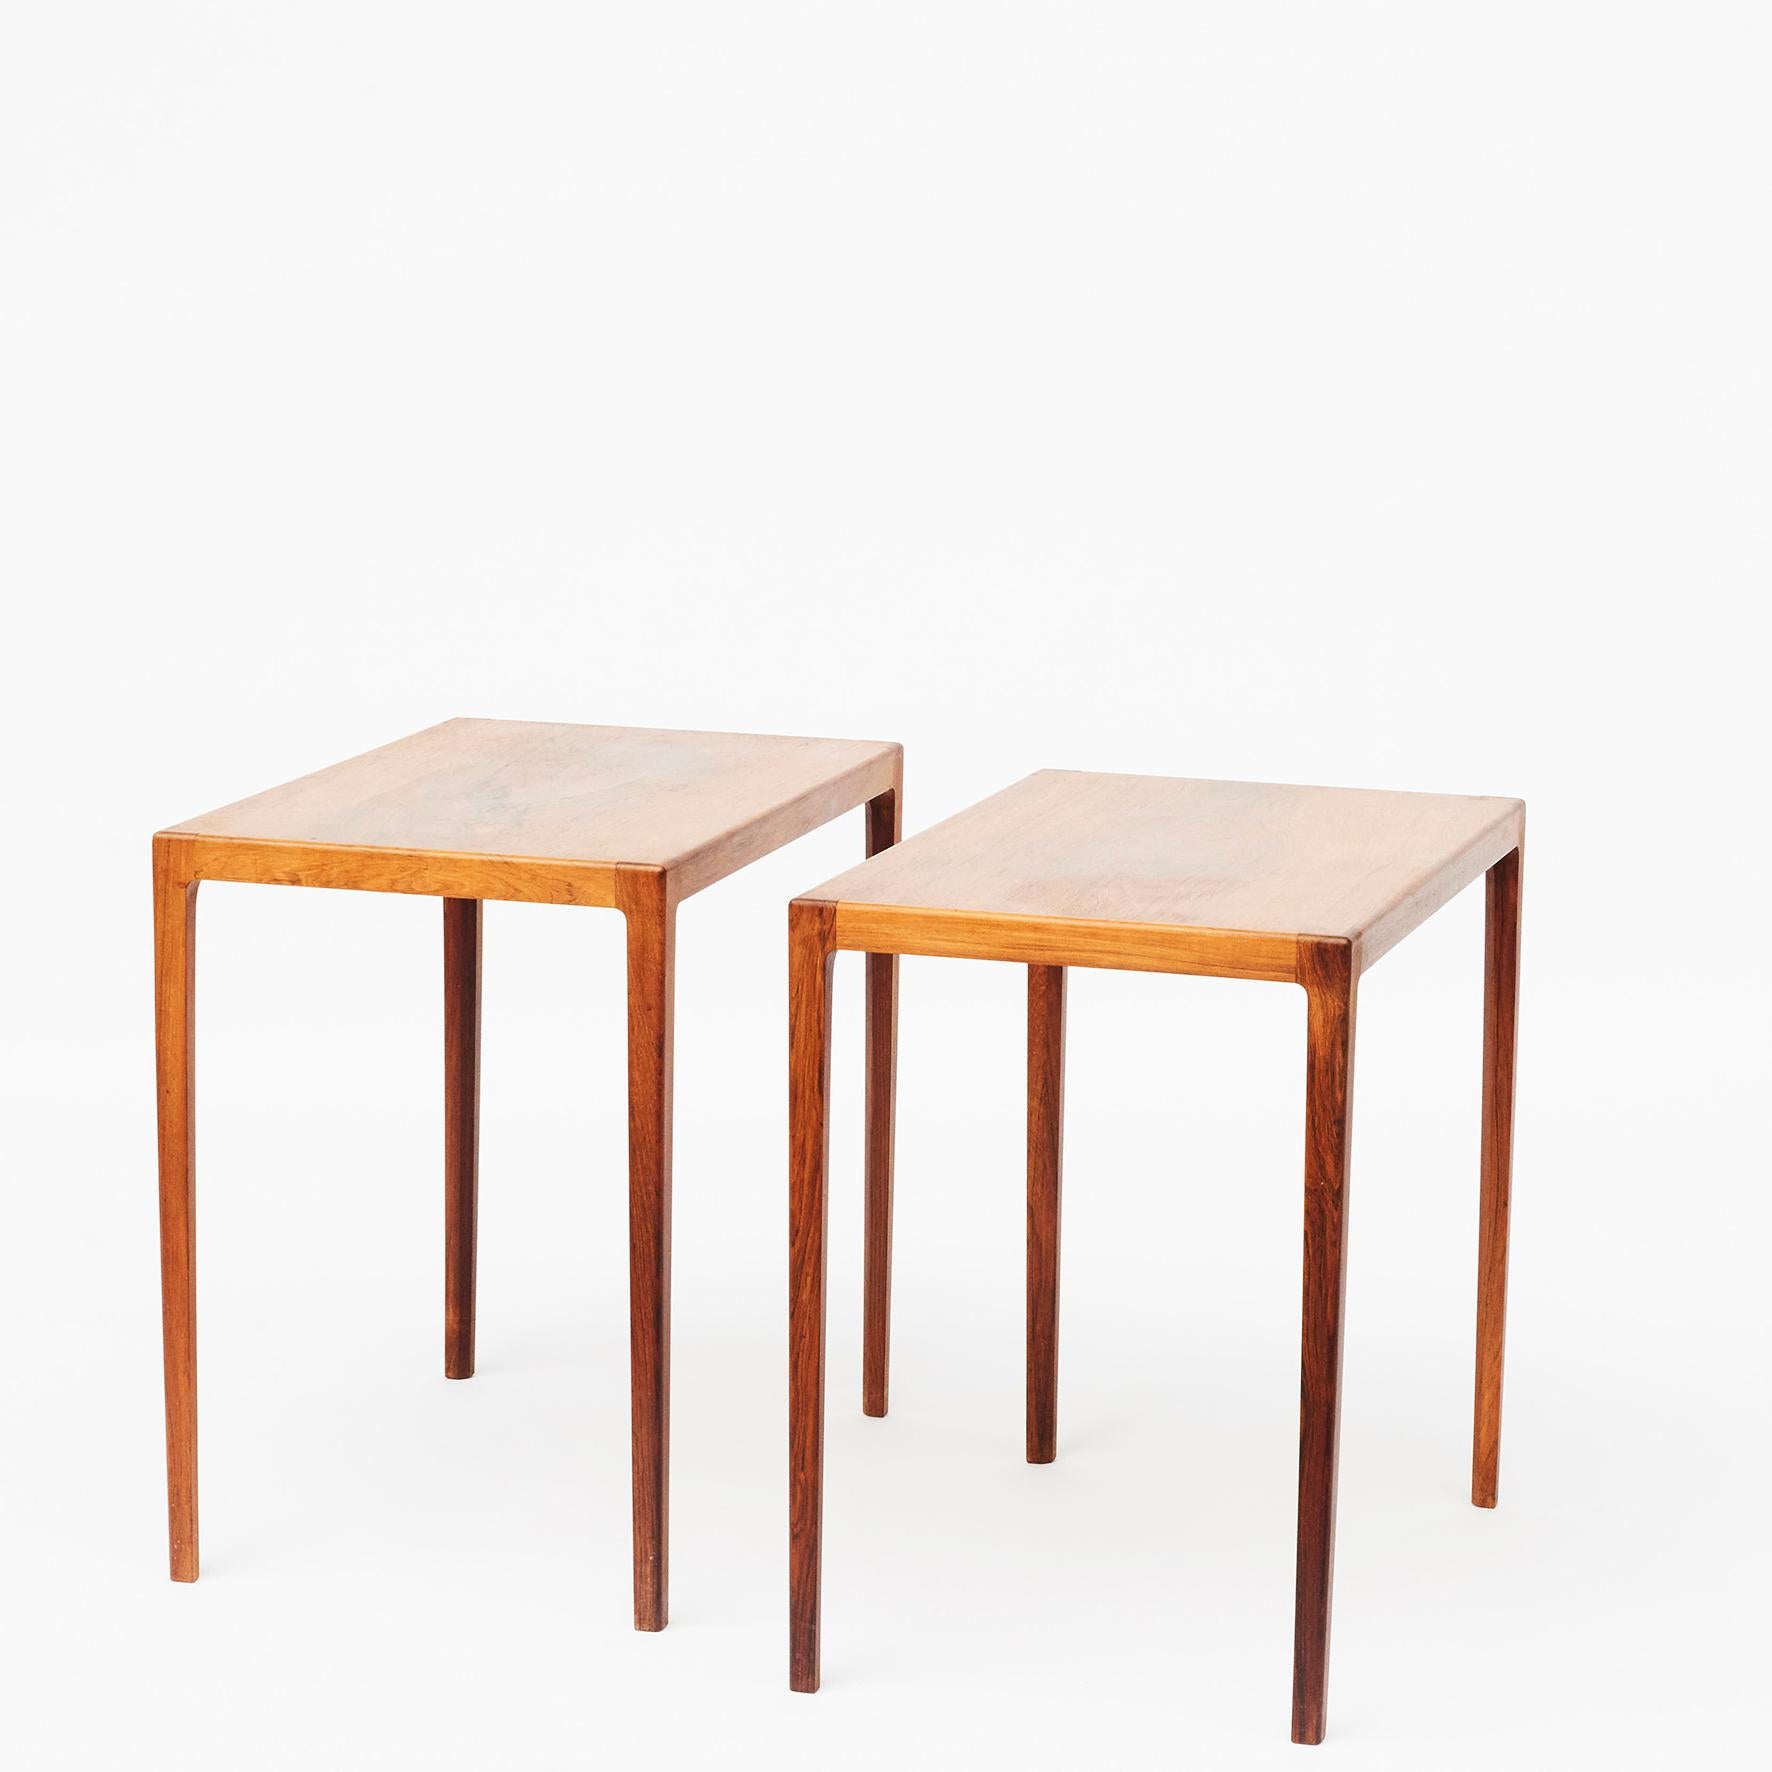 This beautiful pair of Santos mahogany modern side tables are designed by Ludvig Pontoppidan, Denmark, circa 1960.
Slender tapered legs.
In original untouched condition.
Sold as a pair.